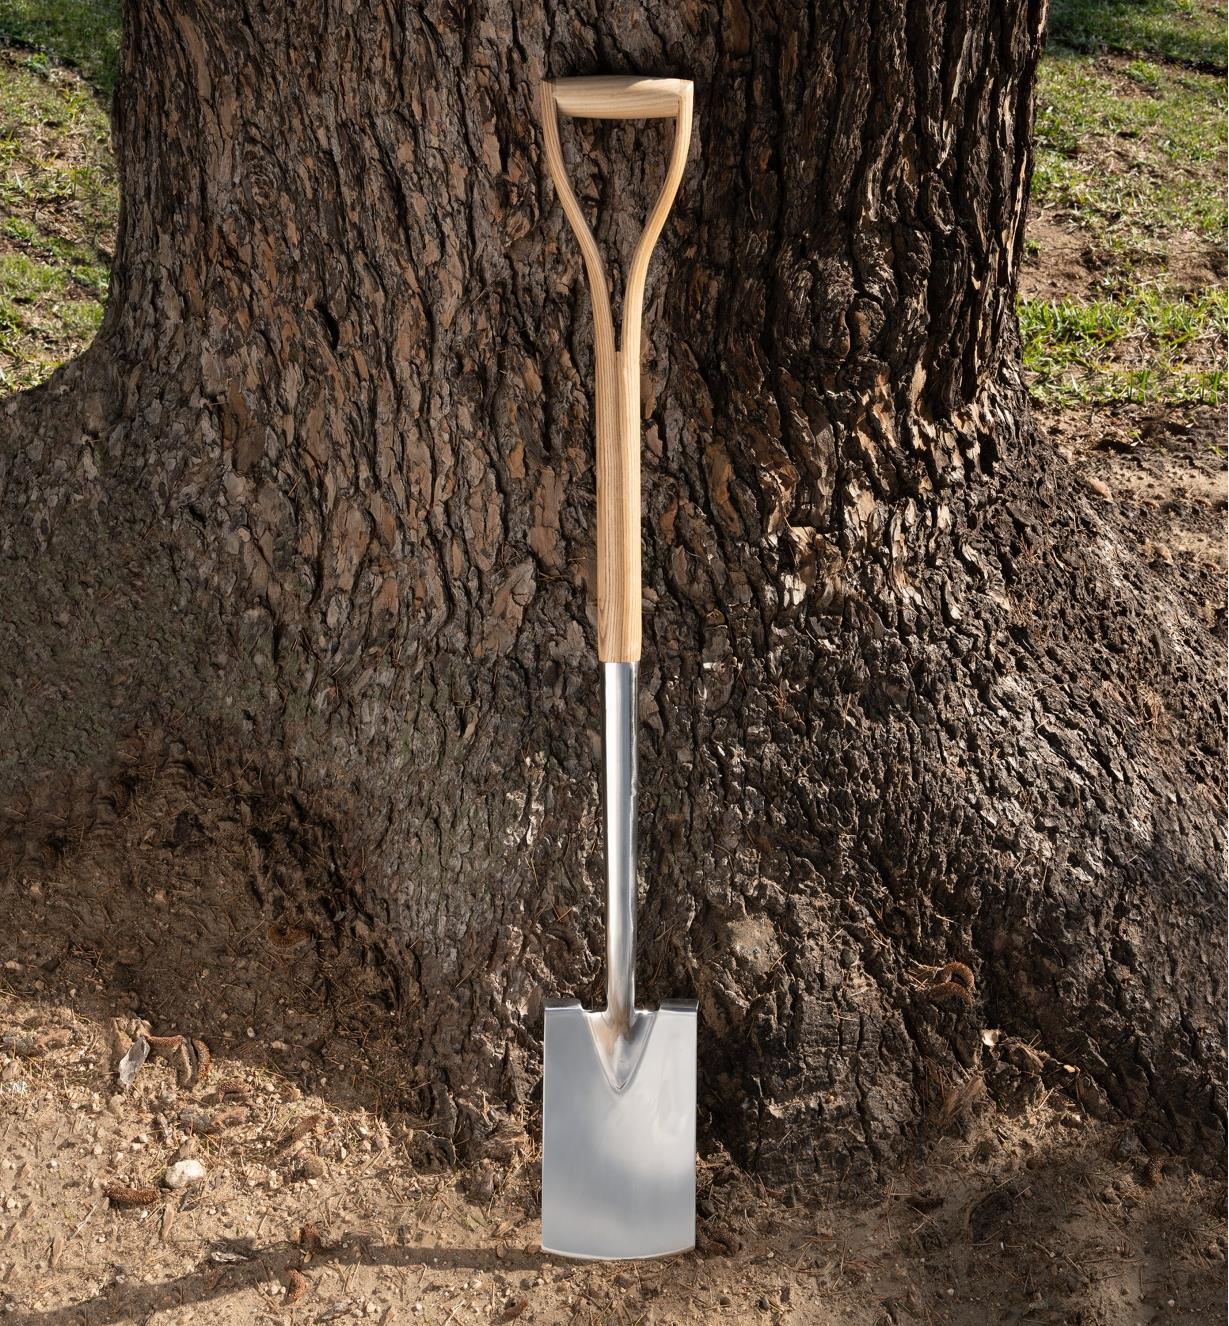 The border spade leaning up against a tree